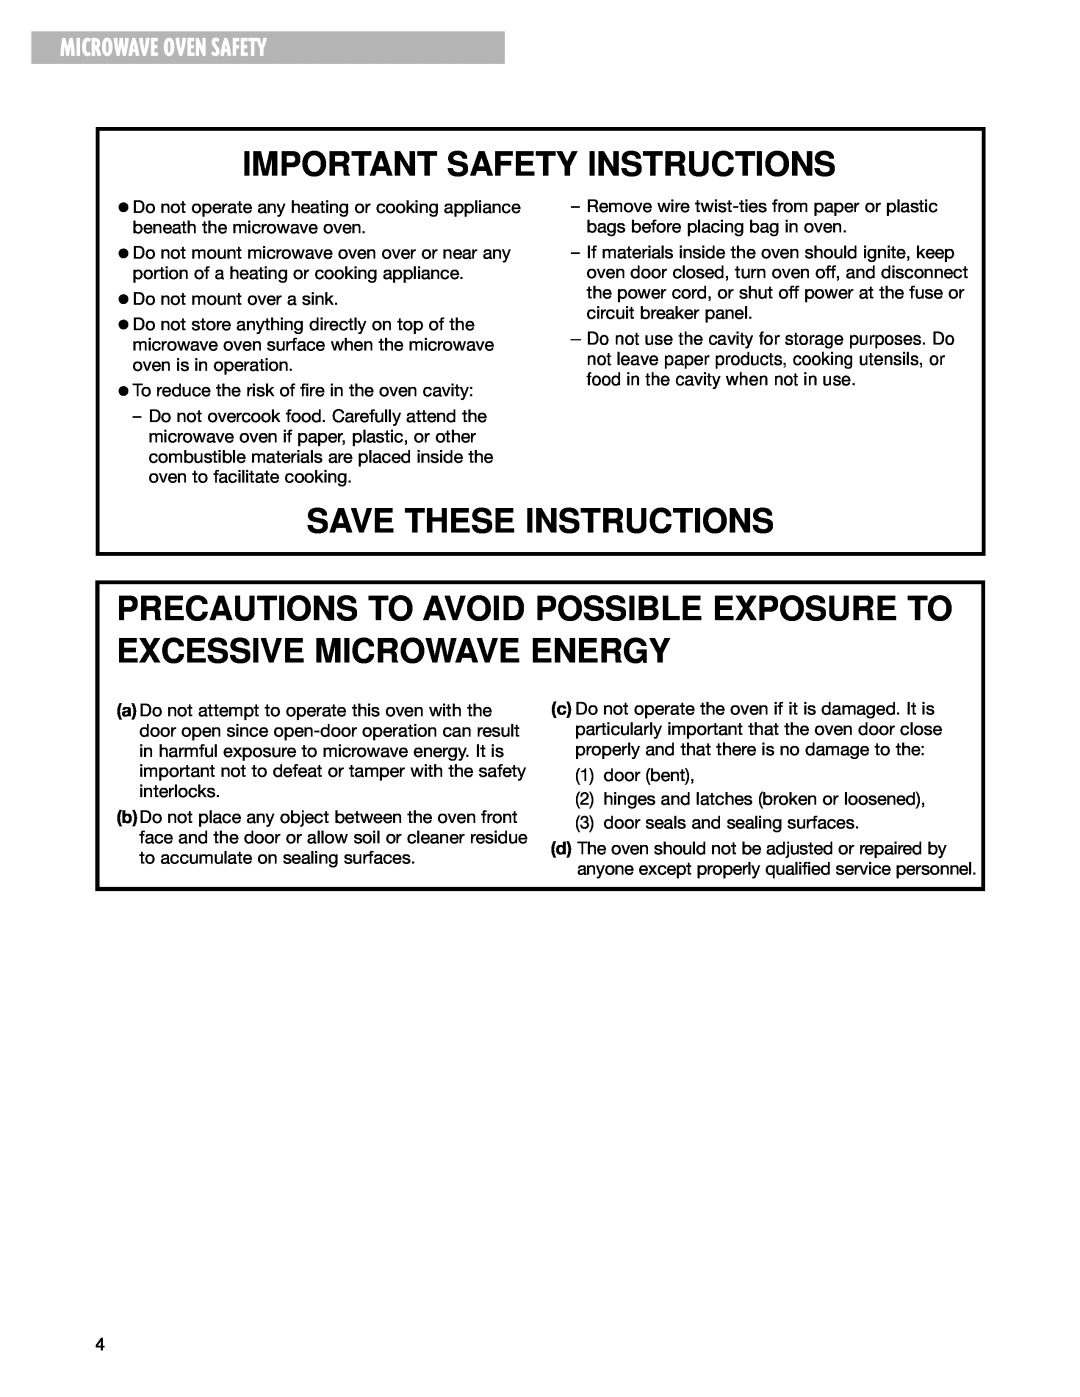 Whirlpool pmn installation instructions Microwave Oven Safety, Important Safety Instructions, Save These Instructions 